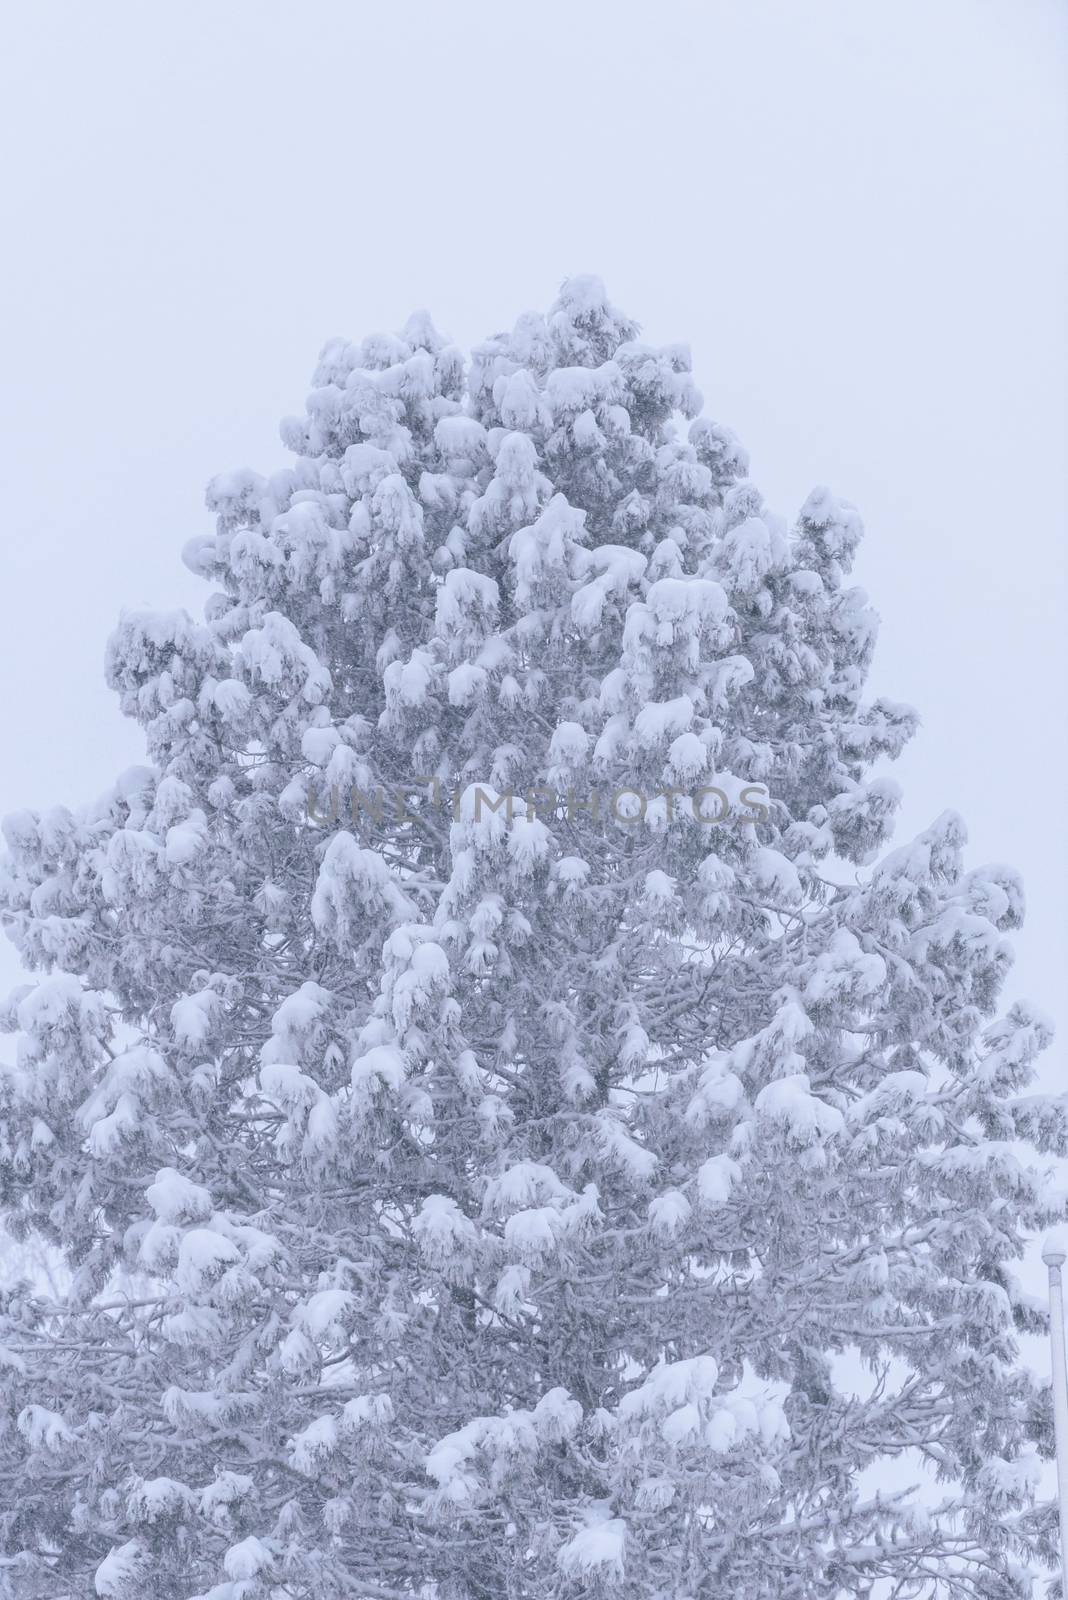 The big tree has covered with heavy snow and bad weather in wint by animagesdesign